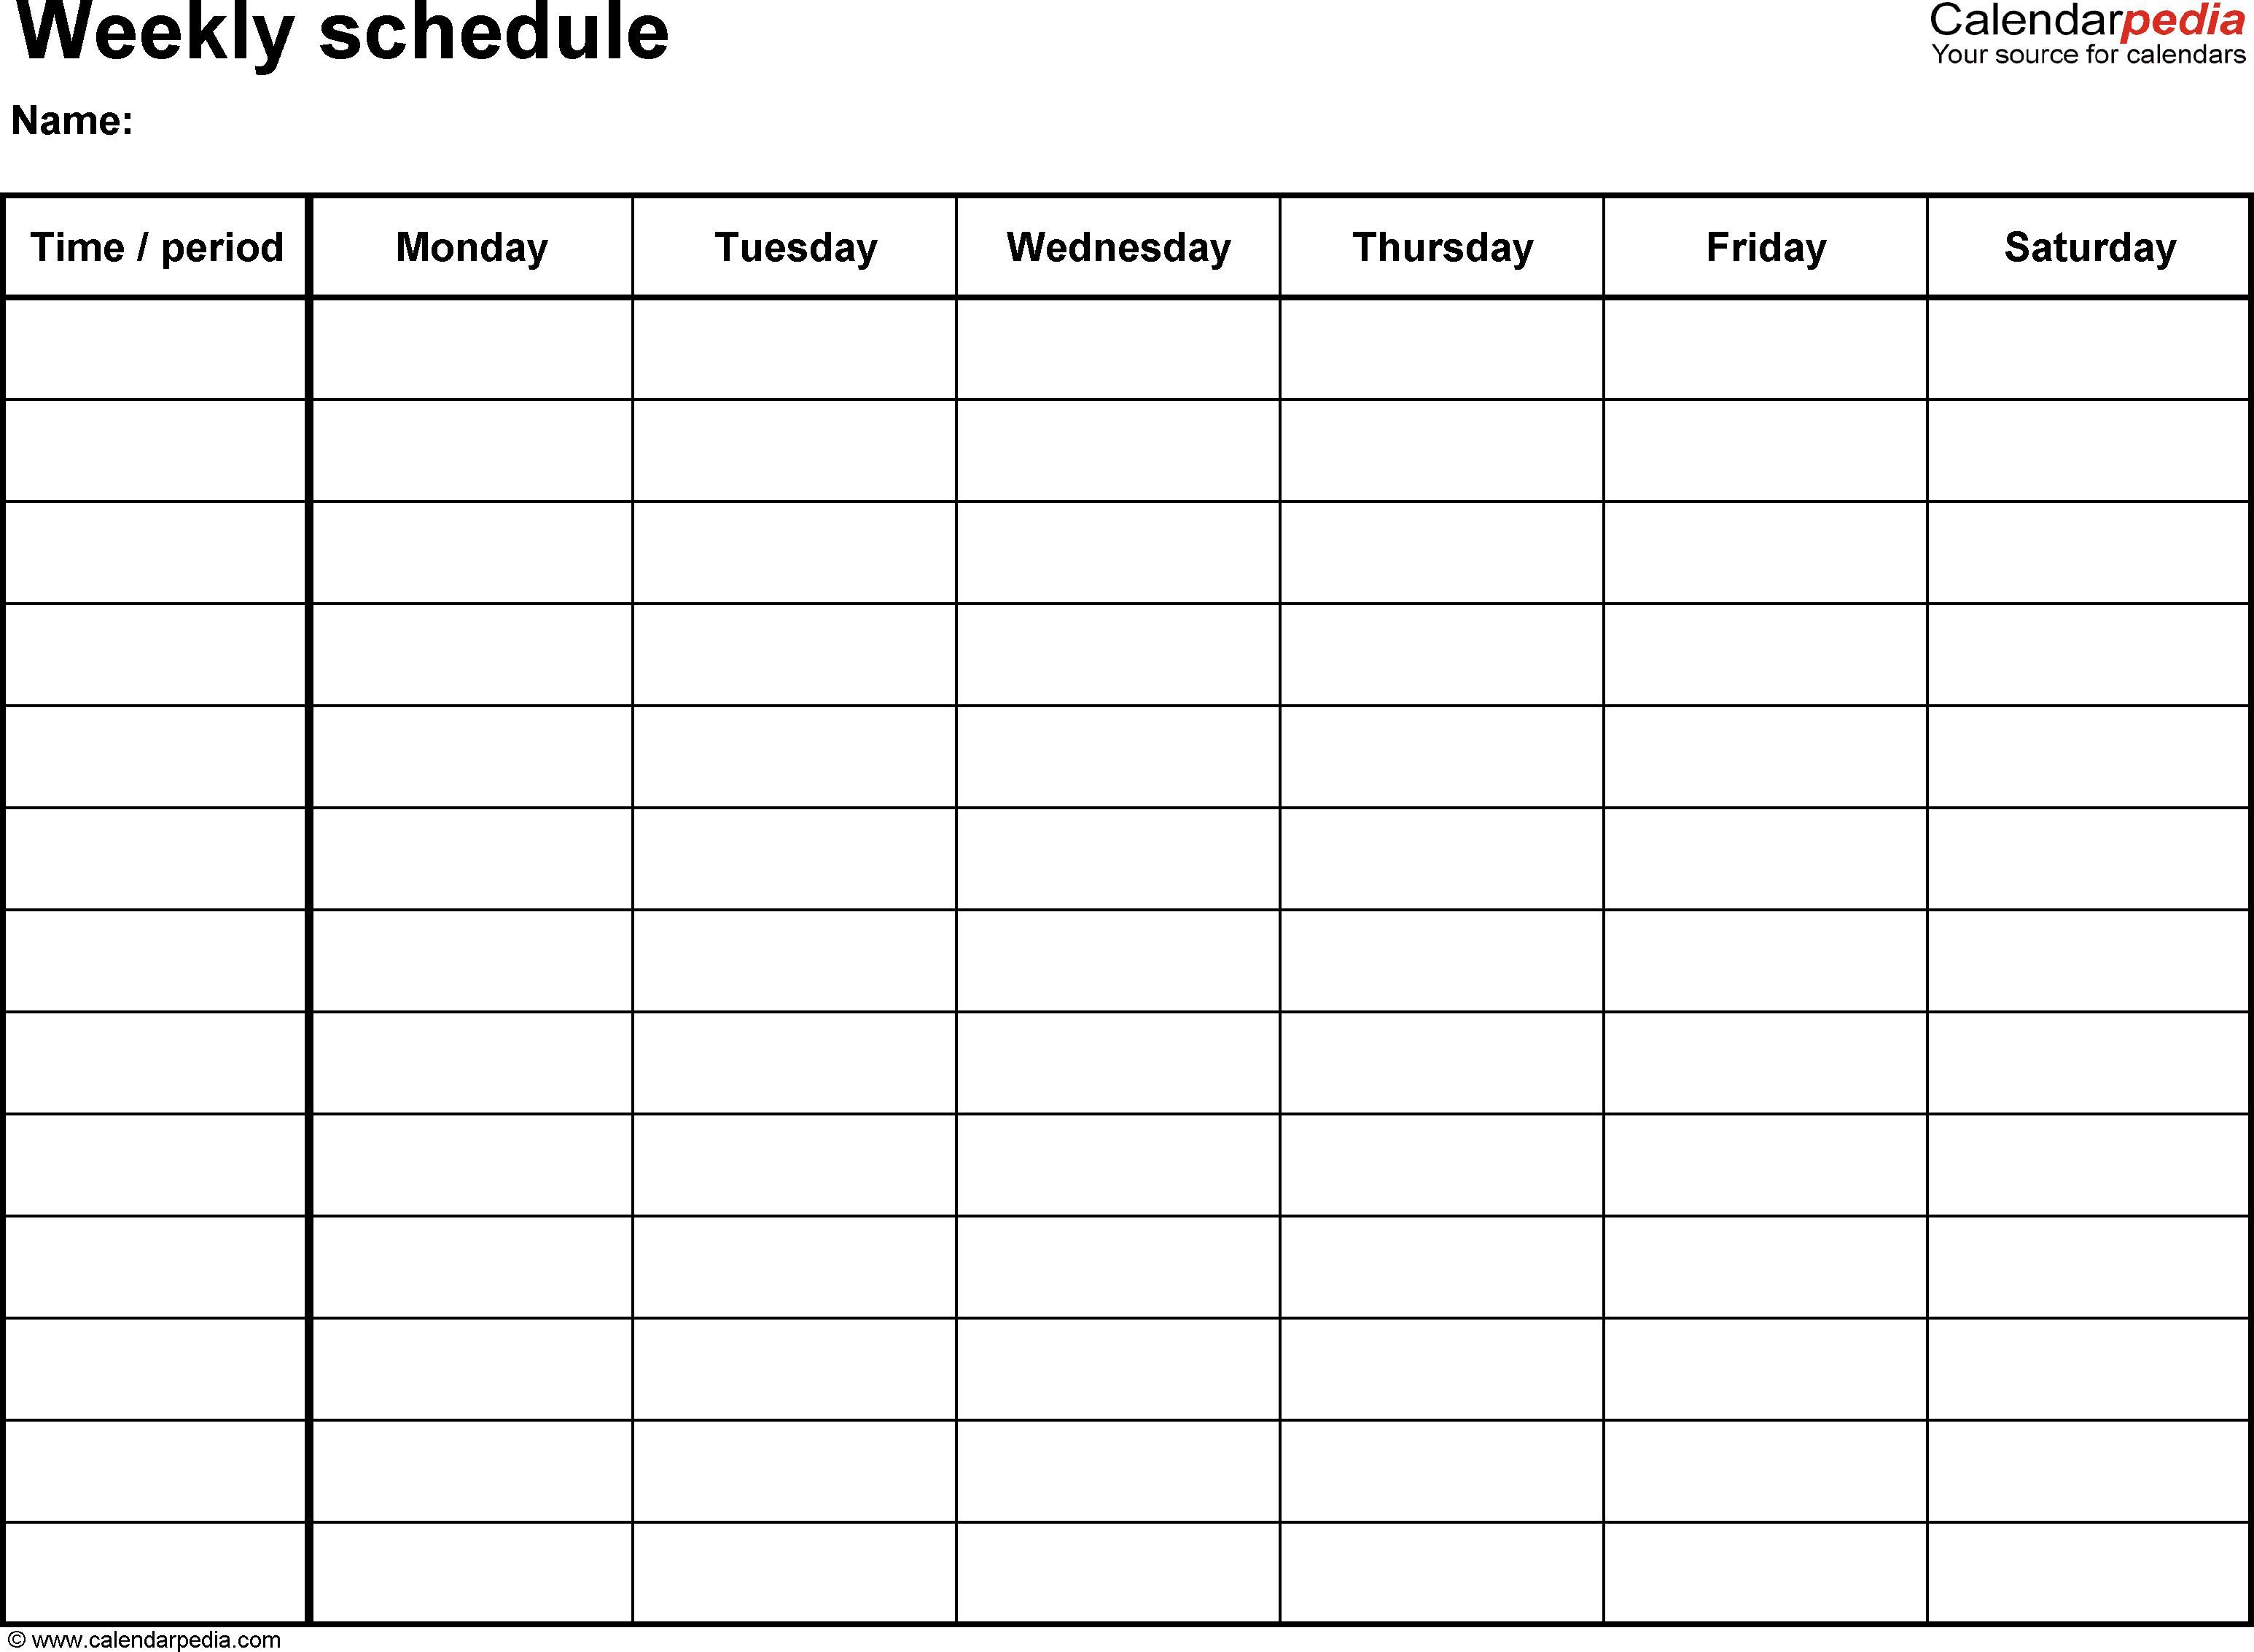 Weekly Downloadable Calendar  Bolan.horizonconsulting.co in Weekly Calendar Template With Time Slots